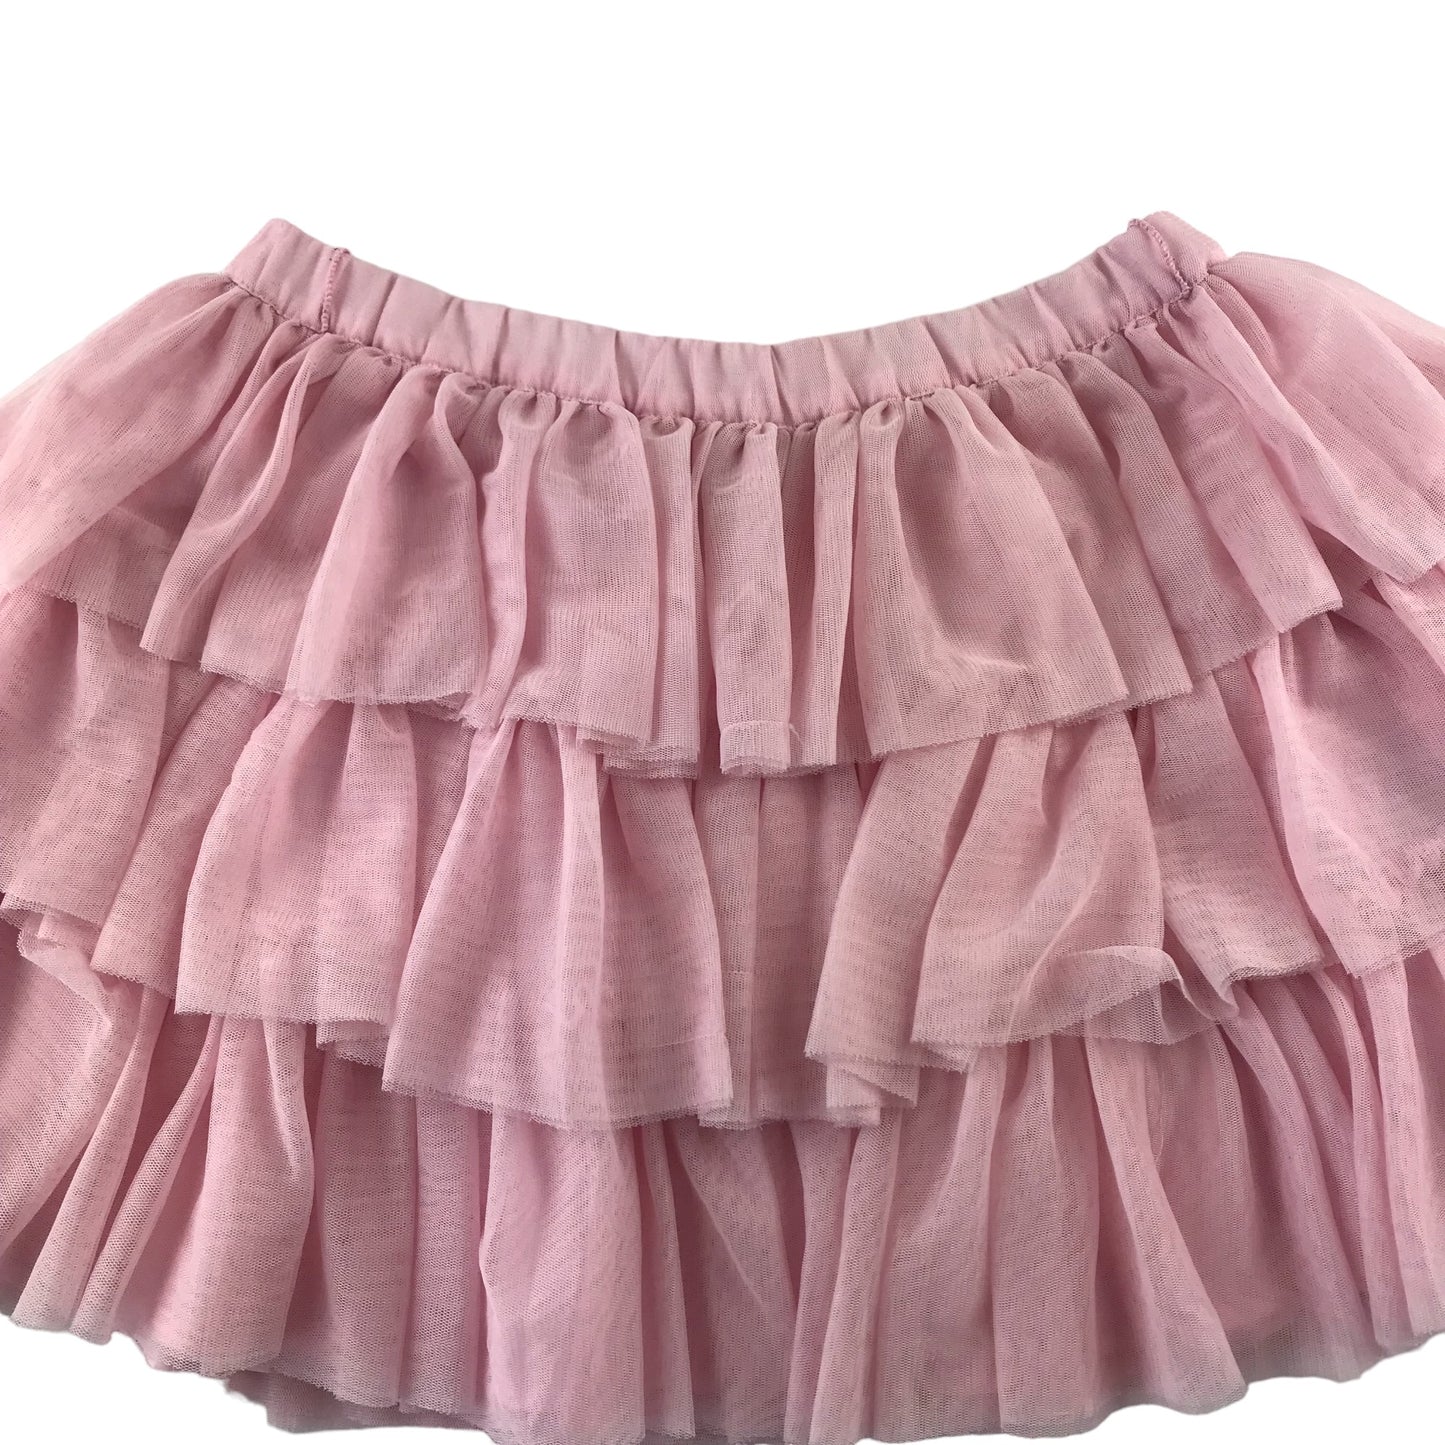 Mini Boden Skirt Age 13 Pink Layered Tulle